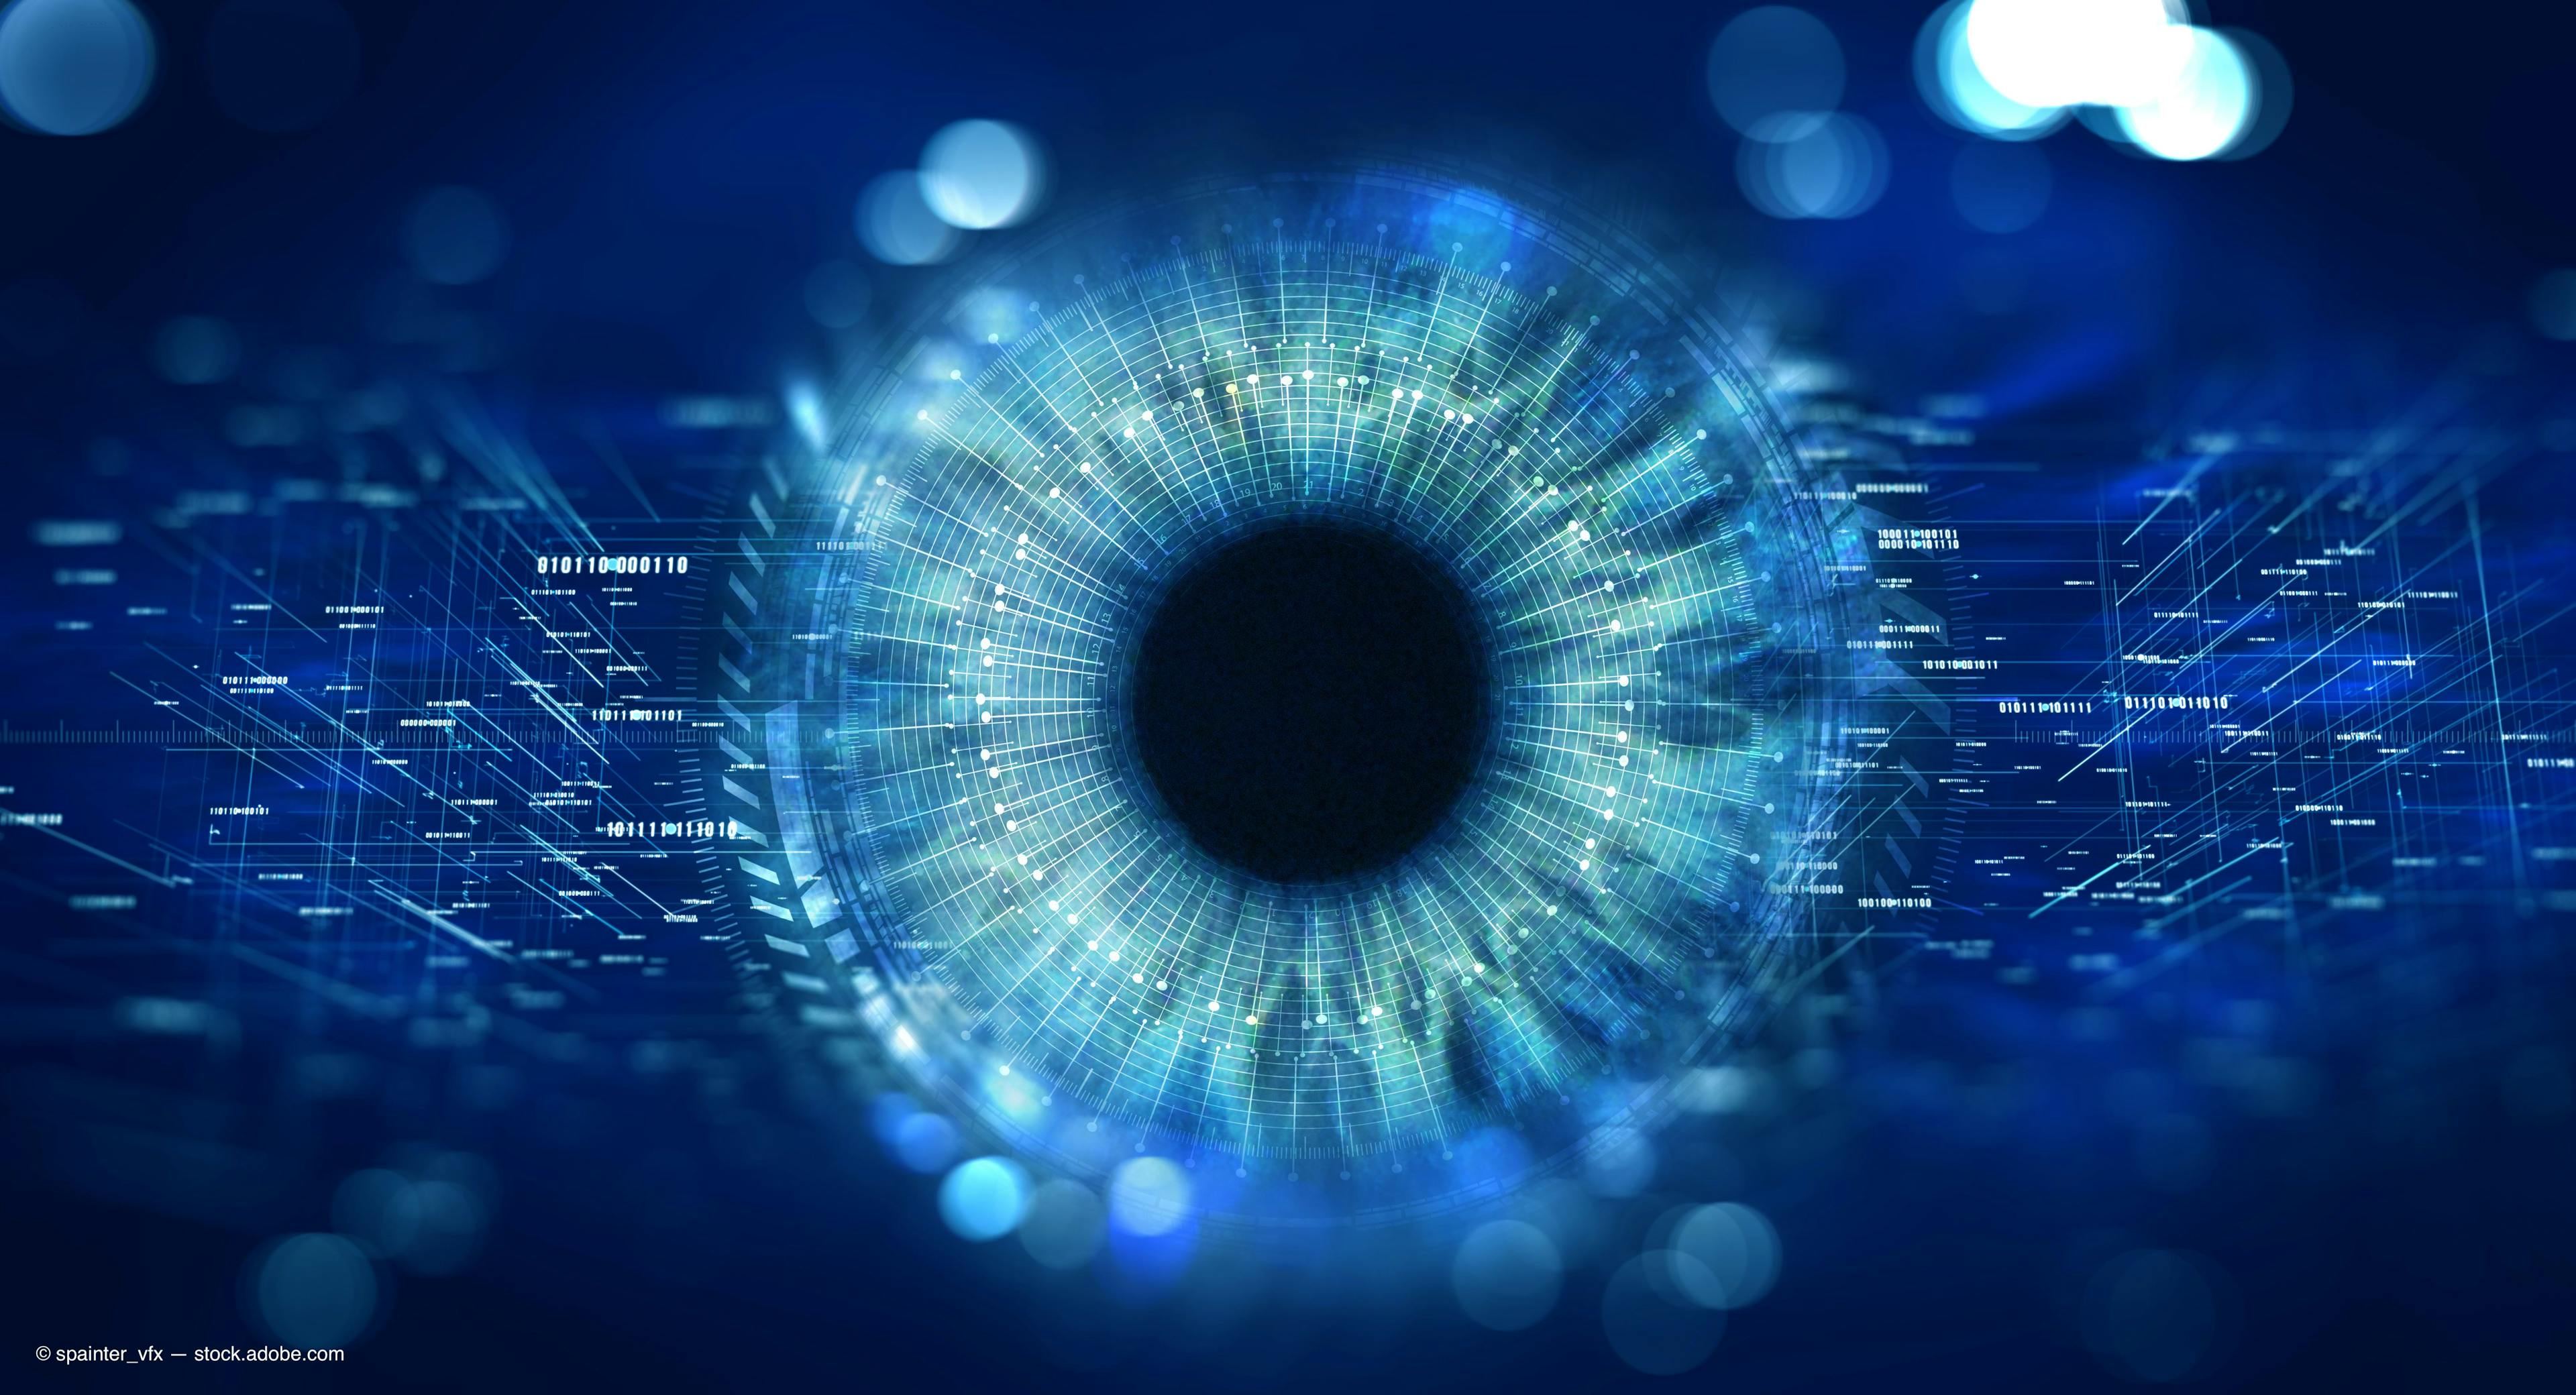 2020 vision: The future of ophthalmology Part III